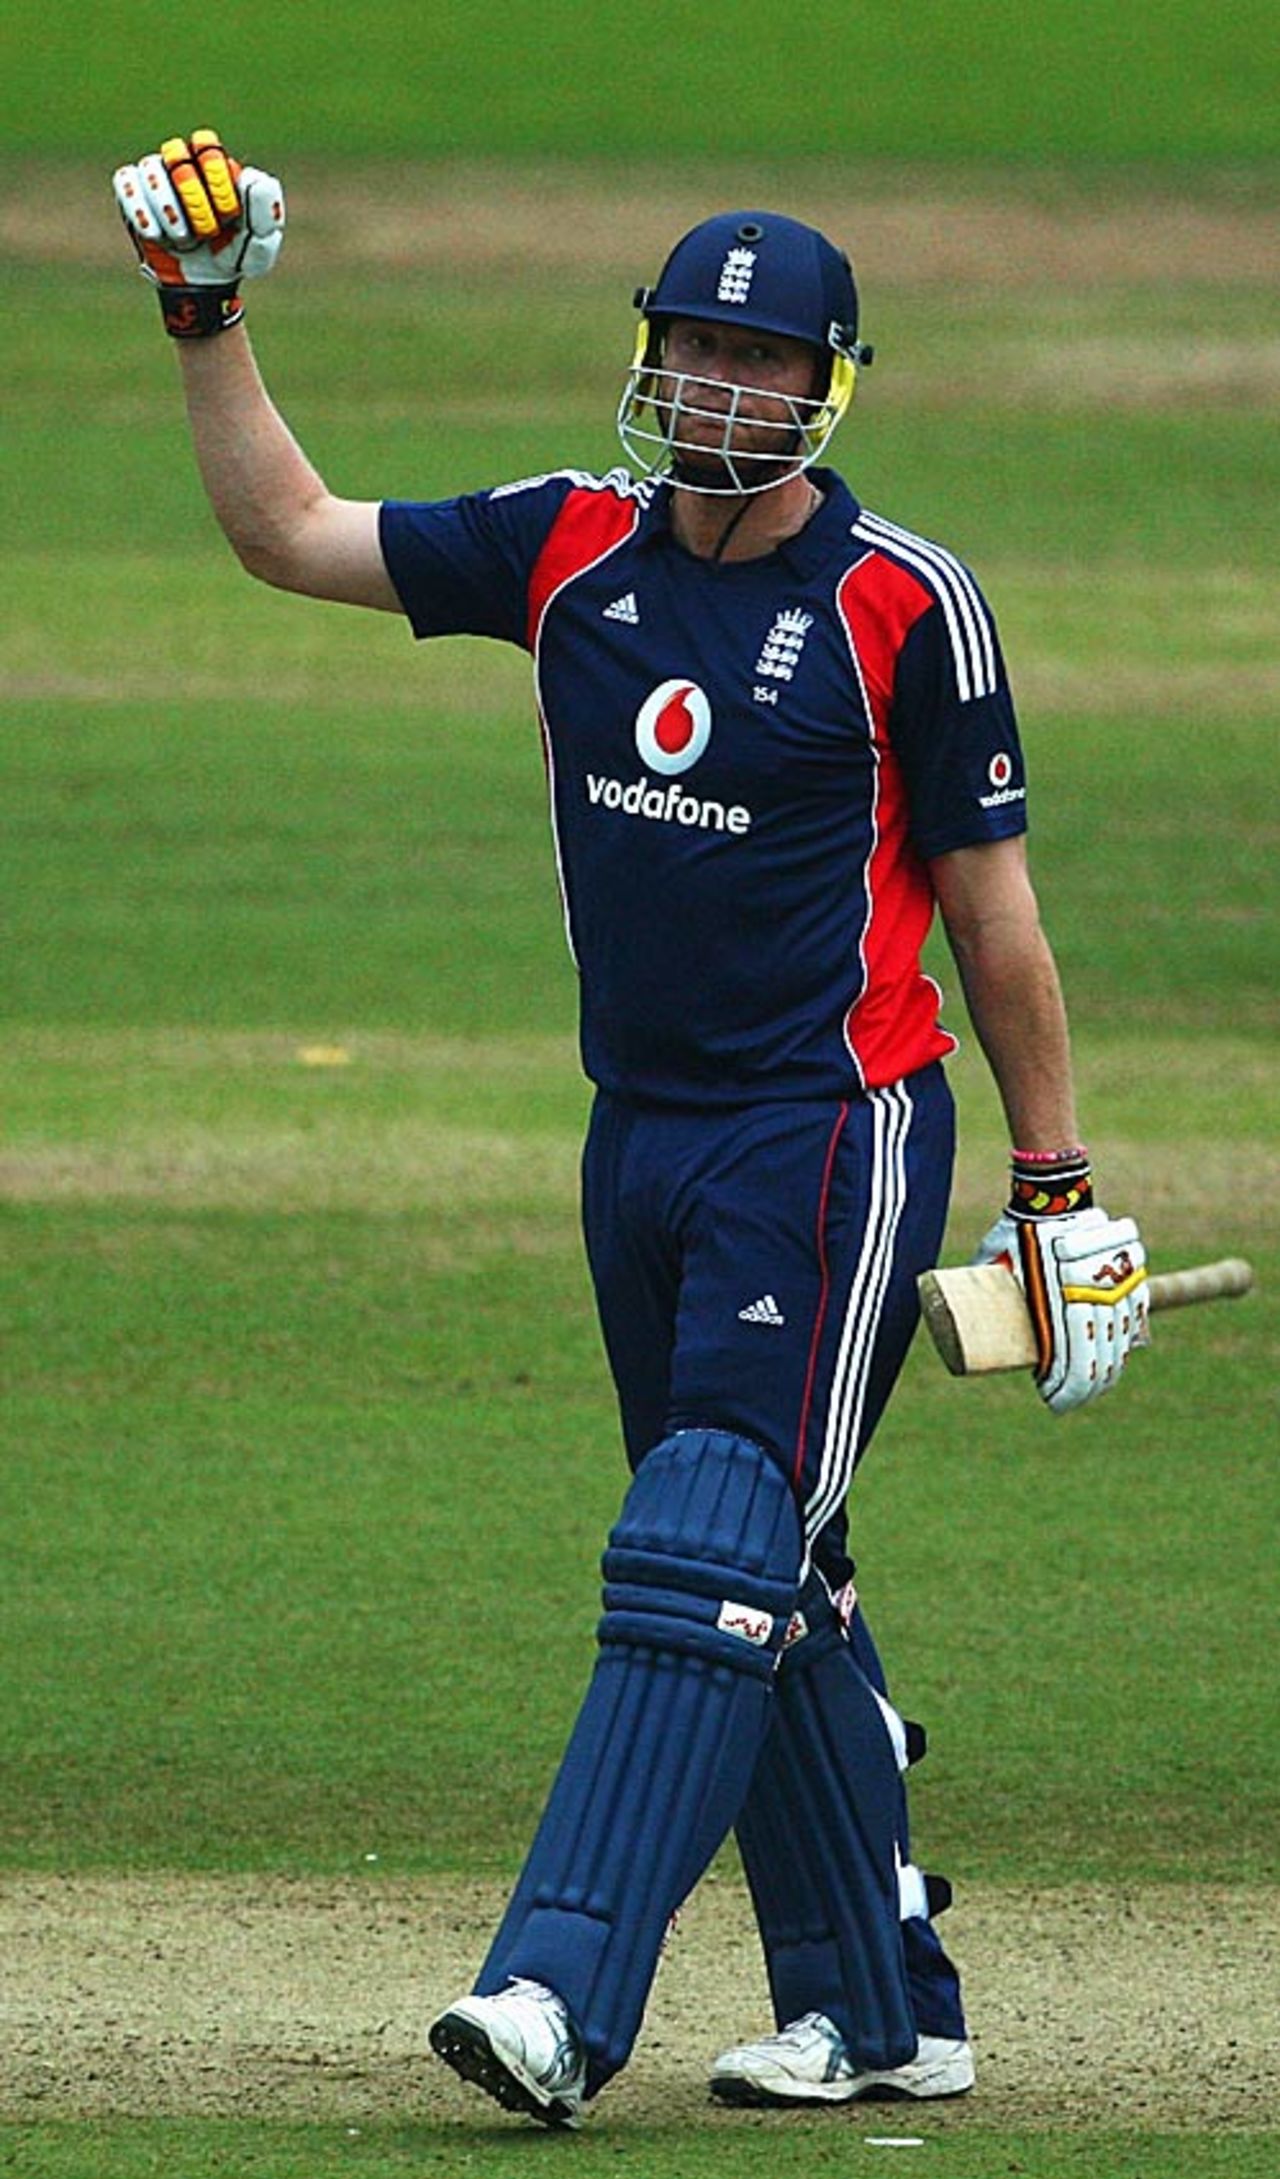 Andrew Flintoff raises his fist after leading England to a seven-wicket win over South Africa, England v South Africa, 4th ODI, Lord's, August 31, 2008